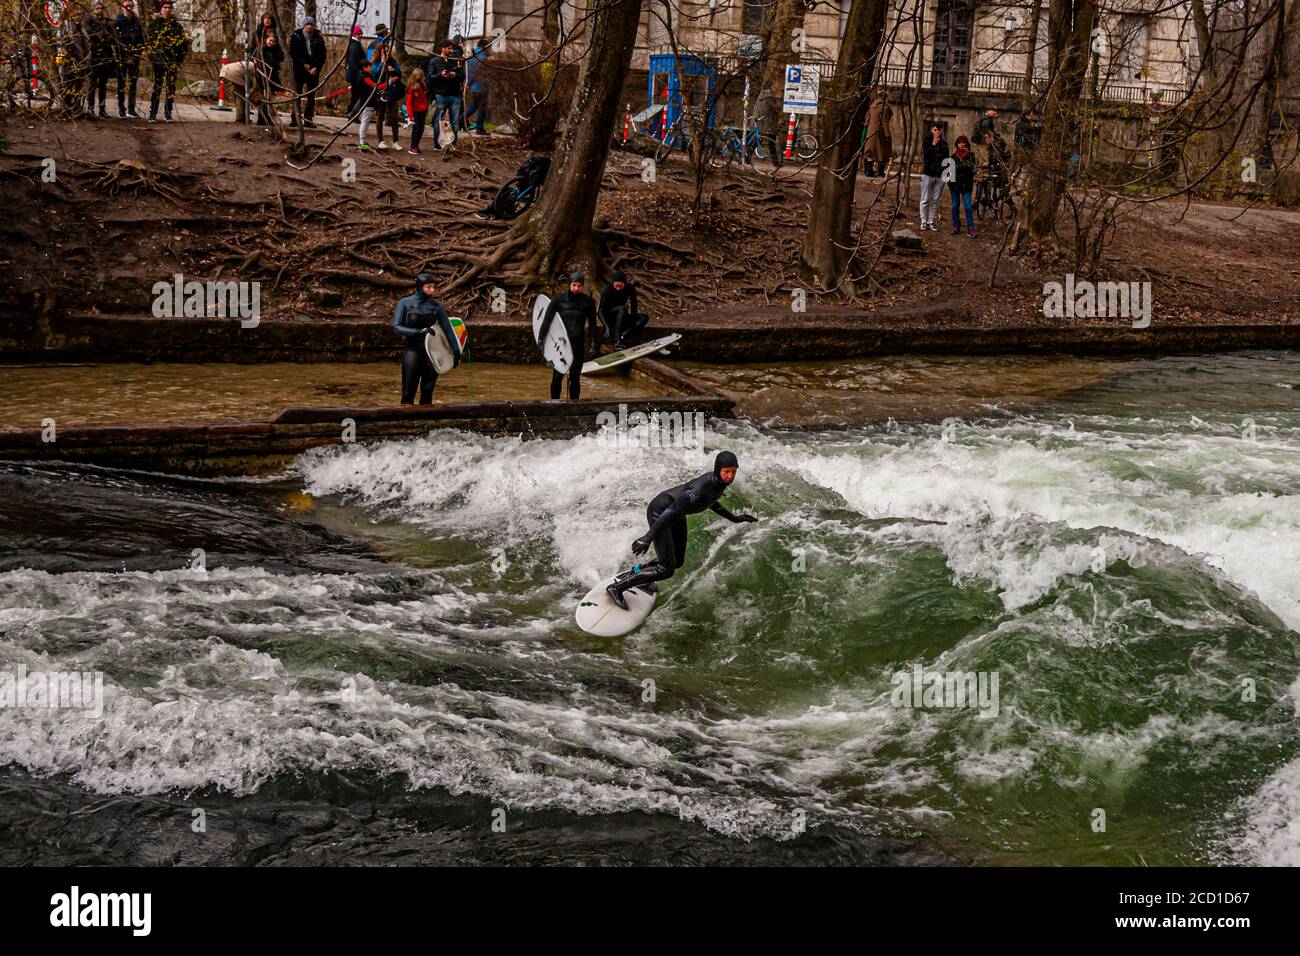 River-Surfing on the Eisbach in Munich, Germany. The standing wave can be surfed for as long as one's balance holds, and in busy times a queue of surfers forms on the bank Stock Photo